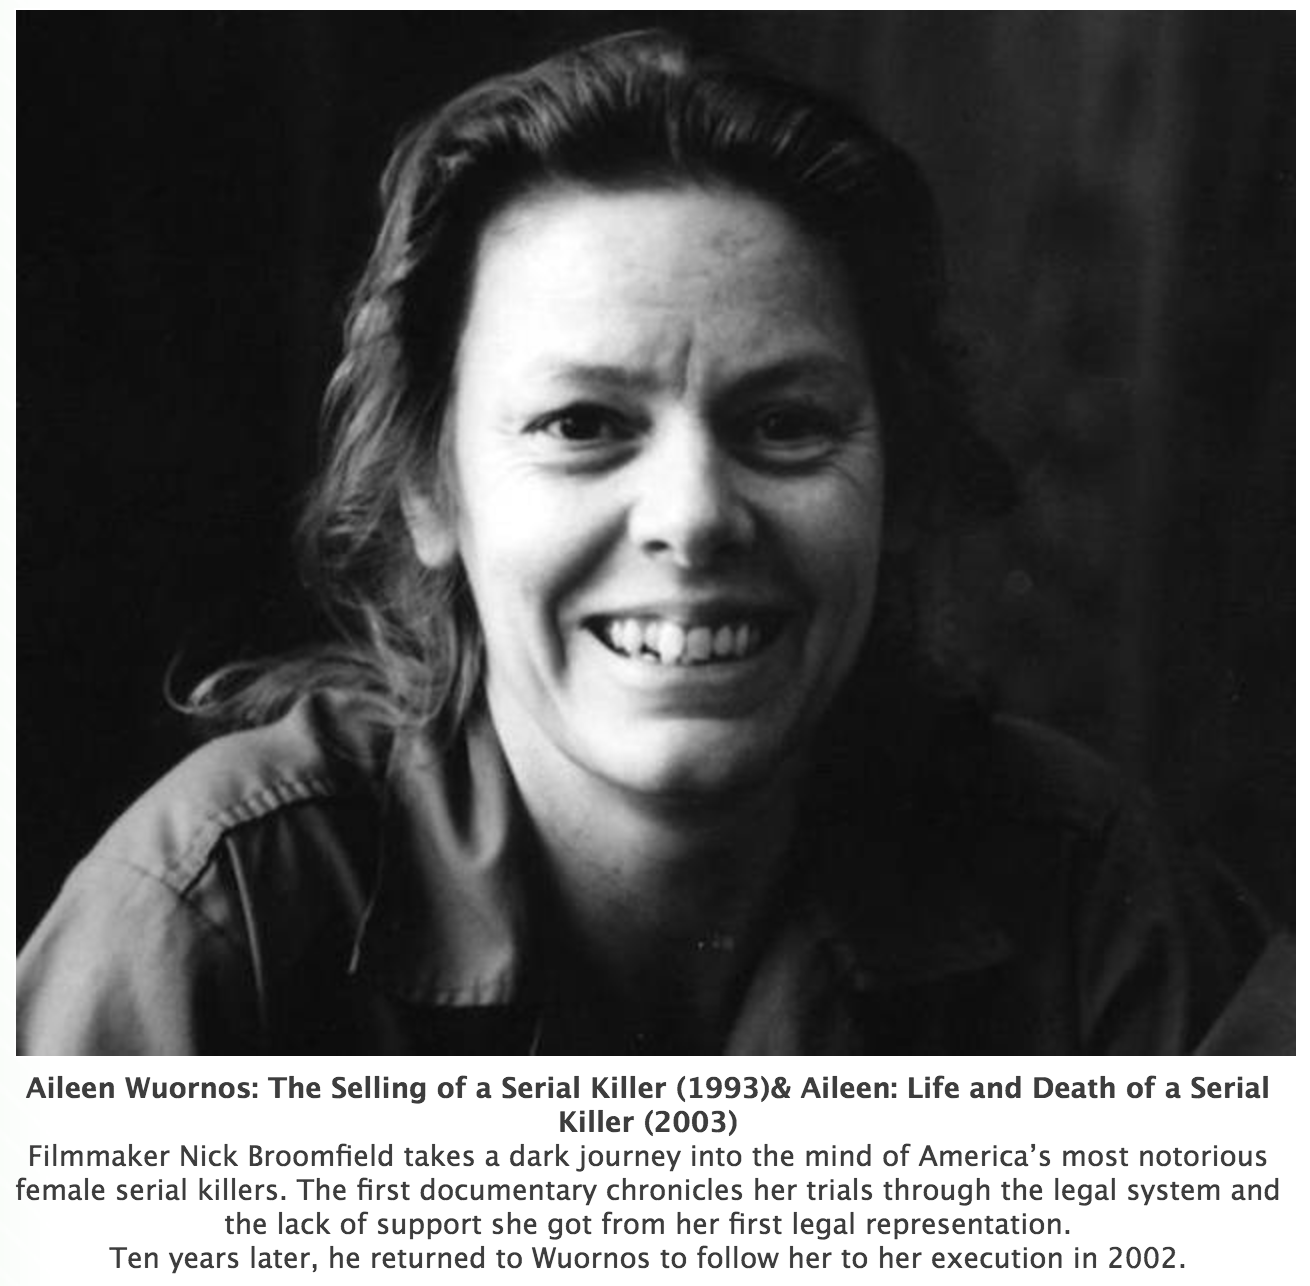 ➢ aileen wuornos - Aileen Wuornos The Selling of a Serial Killer 1993& Aileen Life and Death of a Serial Killer 2003 Filmmaker Nick Broomfield takes a dark journey into the mind of America's most notorious female serial killers. The first documentary chro